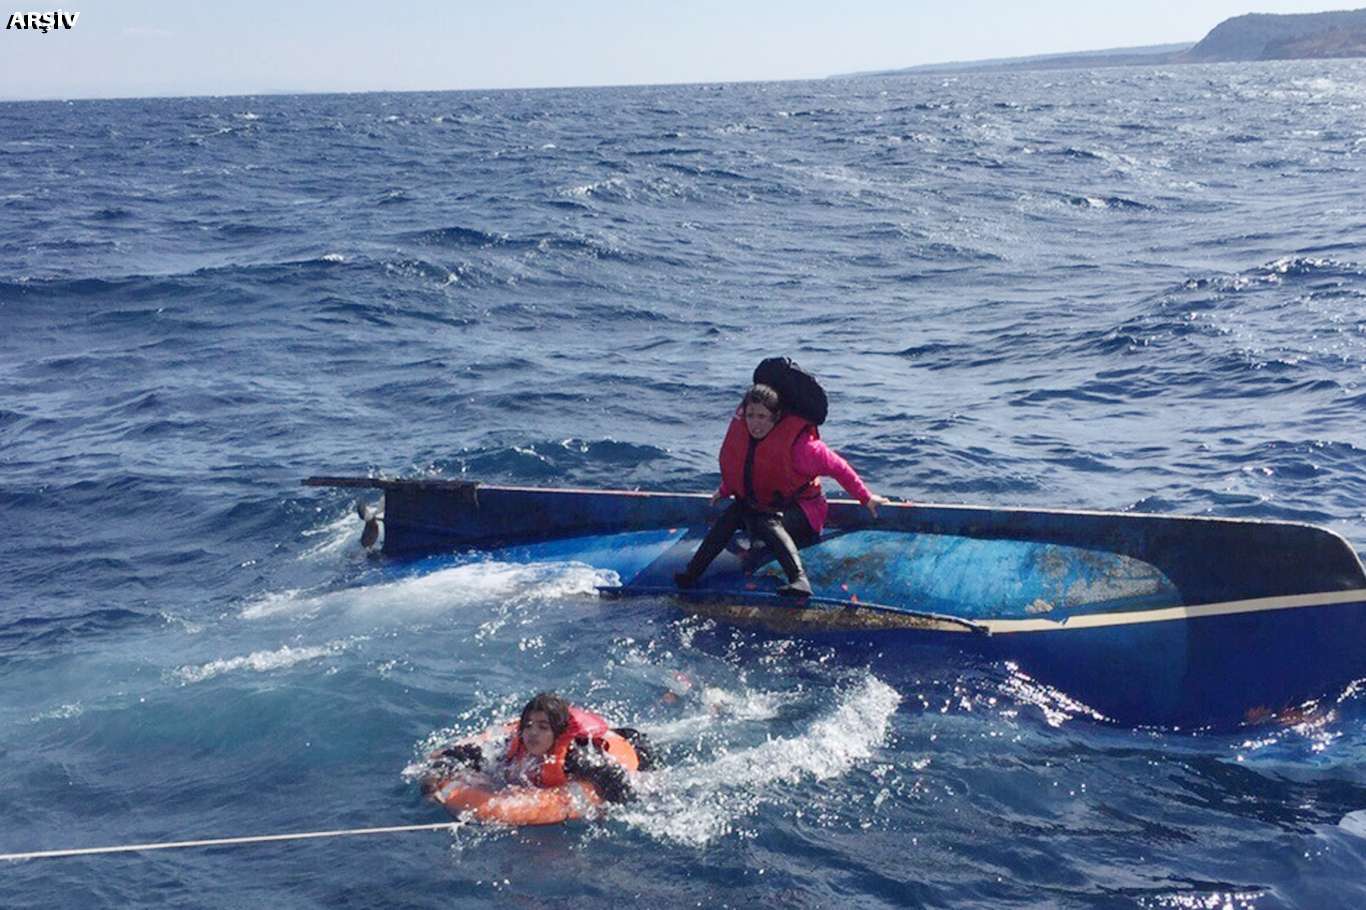 The boat carrying irregular migrants capsizes off the coast of southern Turkey